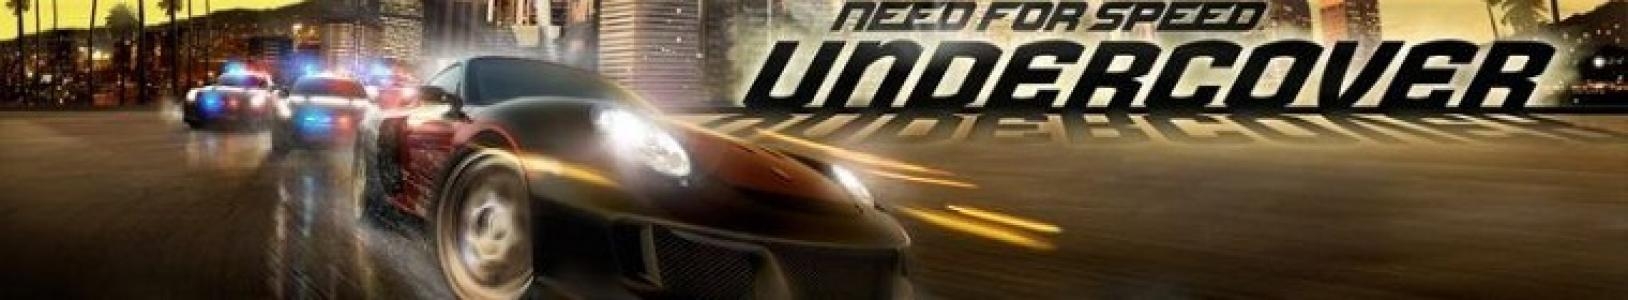 Need for Speed: Undercover banner